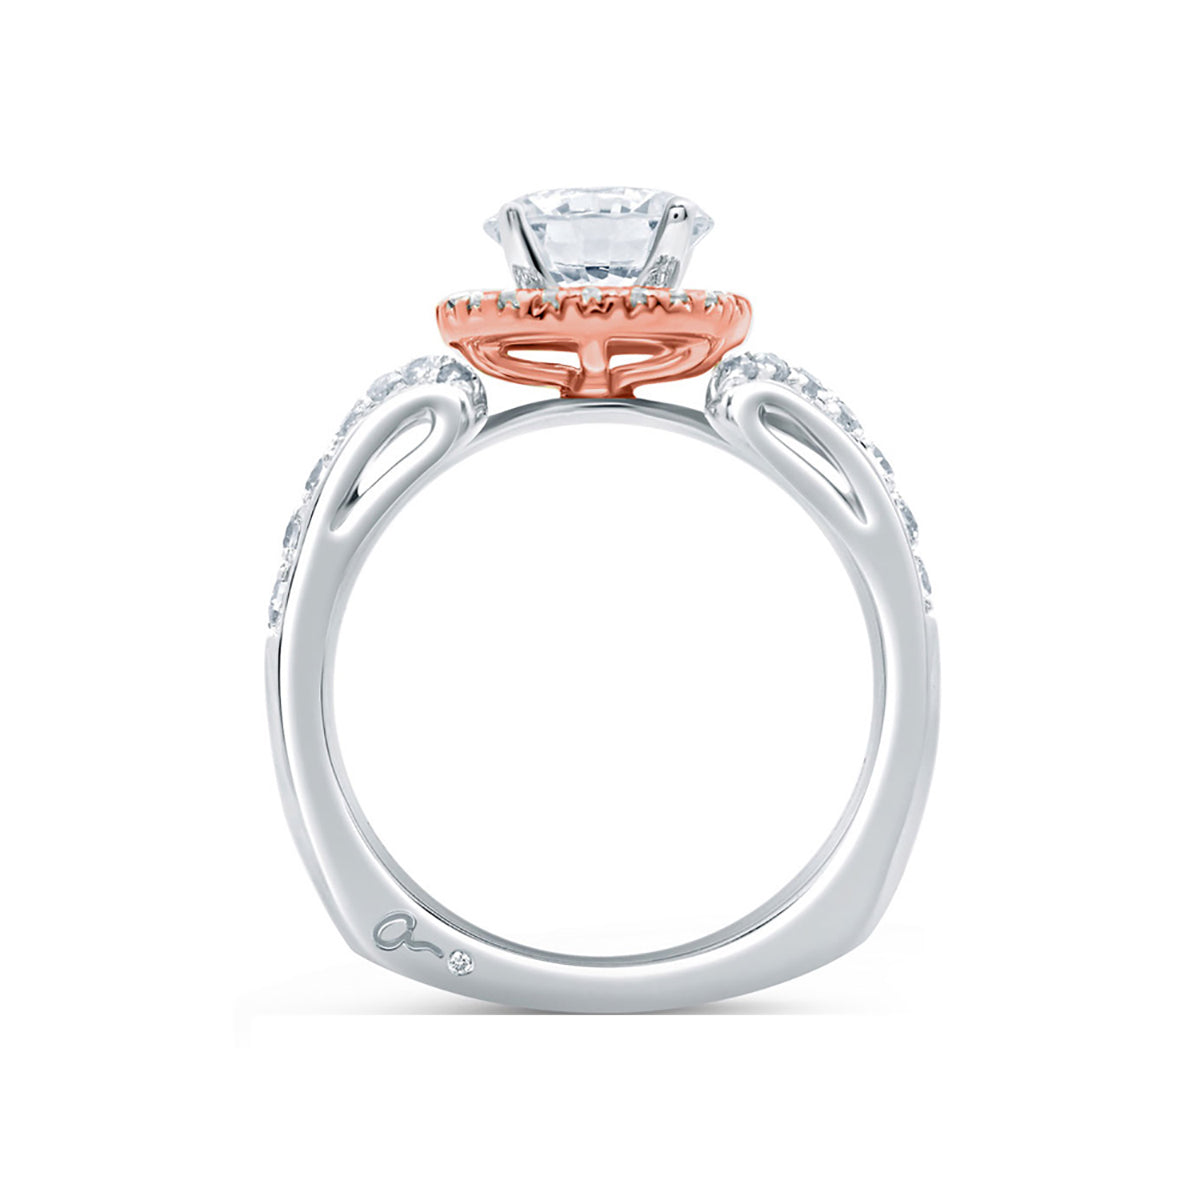 A.Jaffe Center of My Universe Rose Gold Diamond Halo Designer Engagement Ring MES636/148